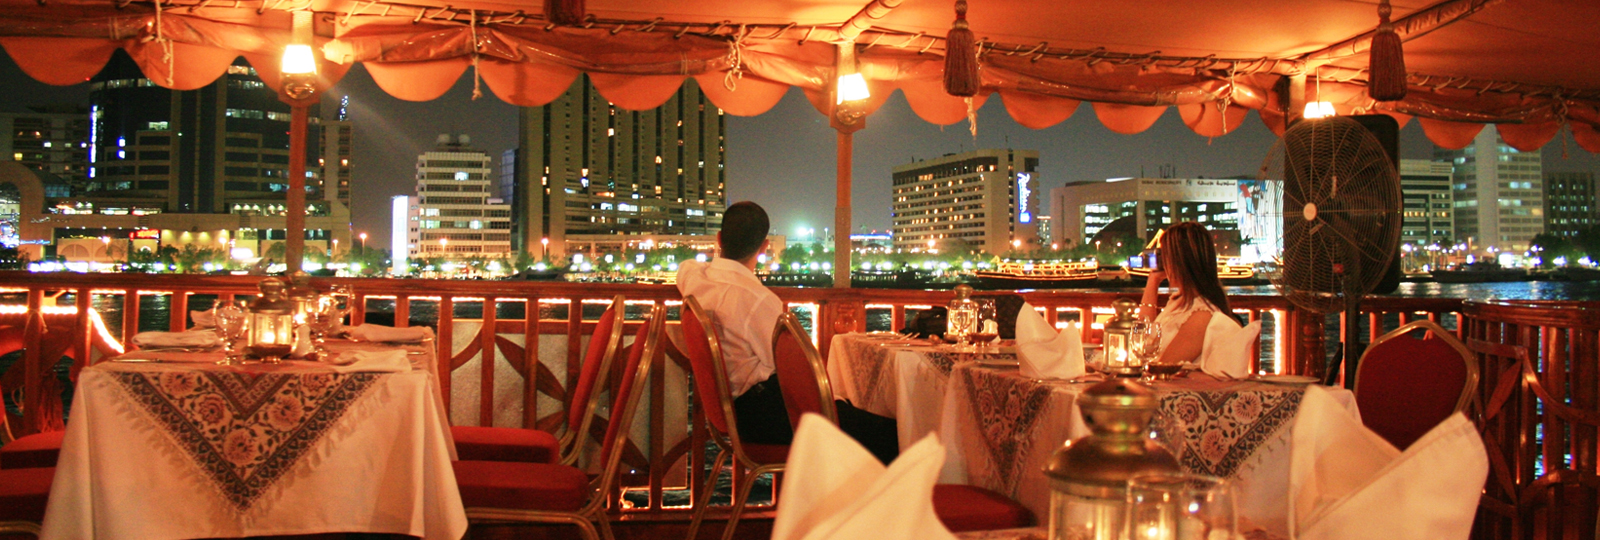 dubai dhow cruise dinner in just 40aed with you loved ones